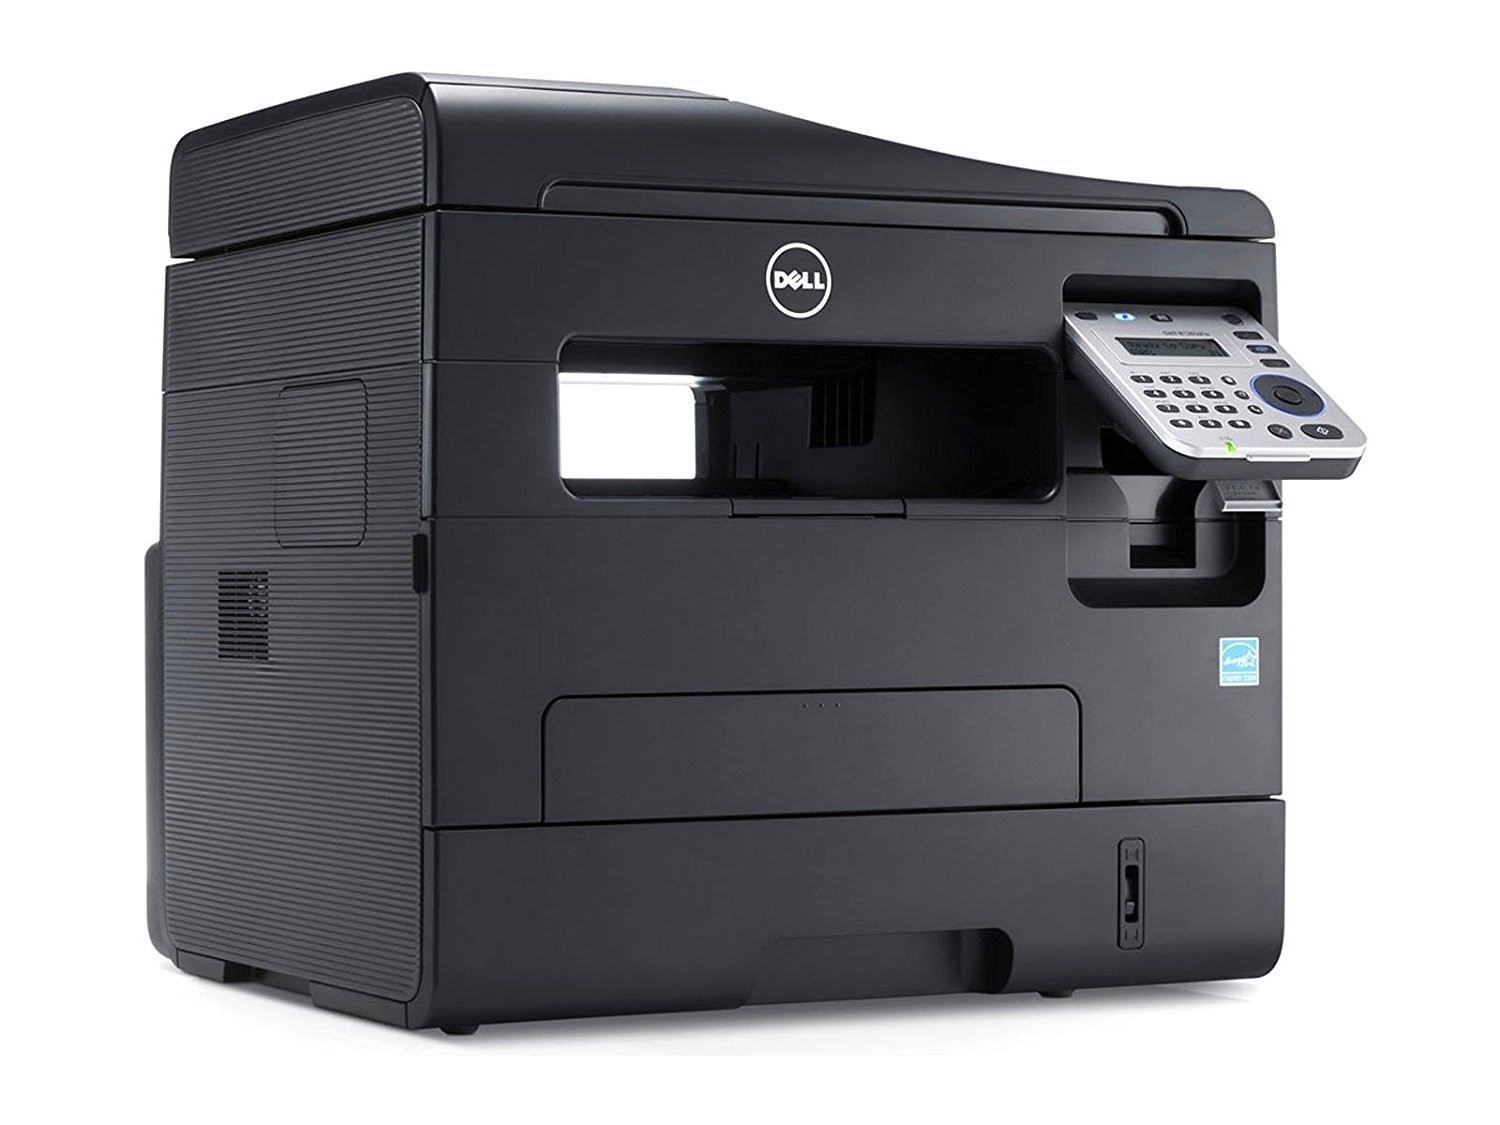 Dell B1265DFW Laser Multifunction Monochrome All-in-One Printer KXCF4